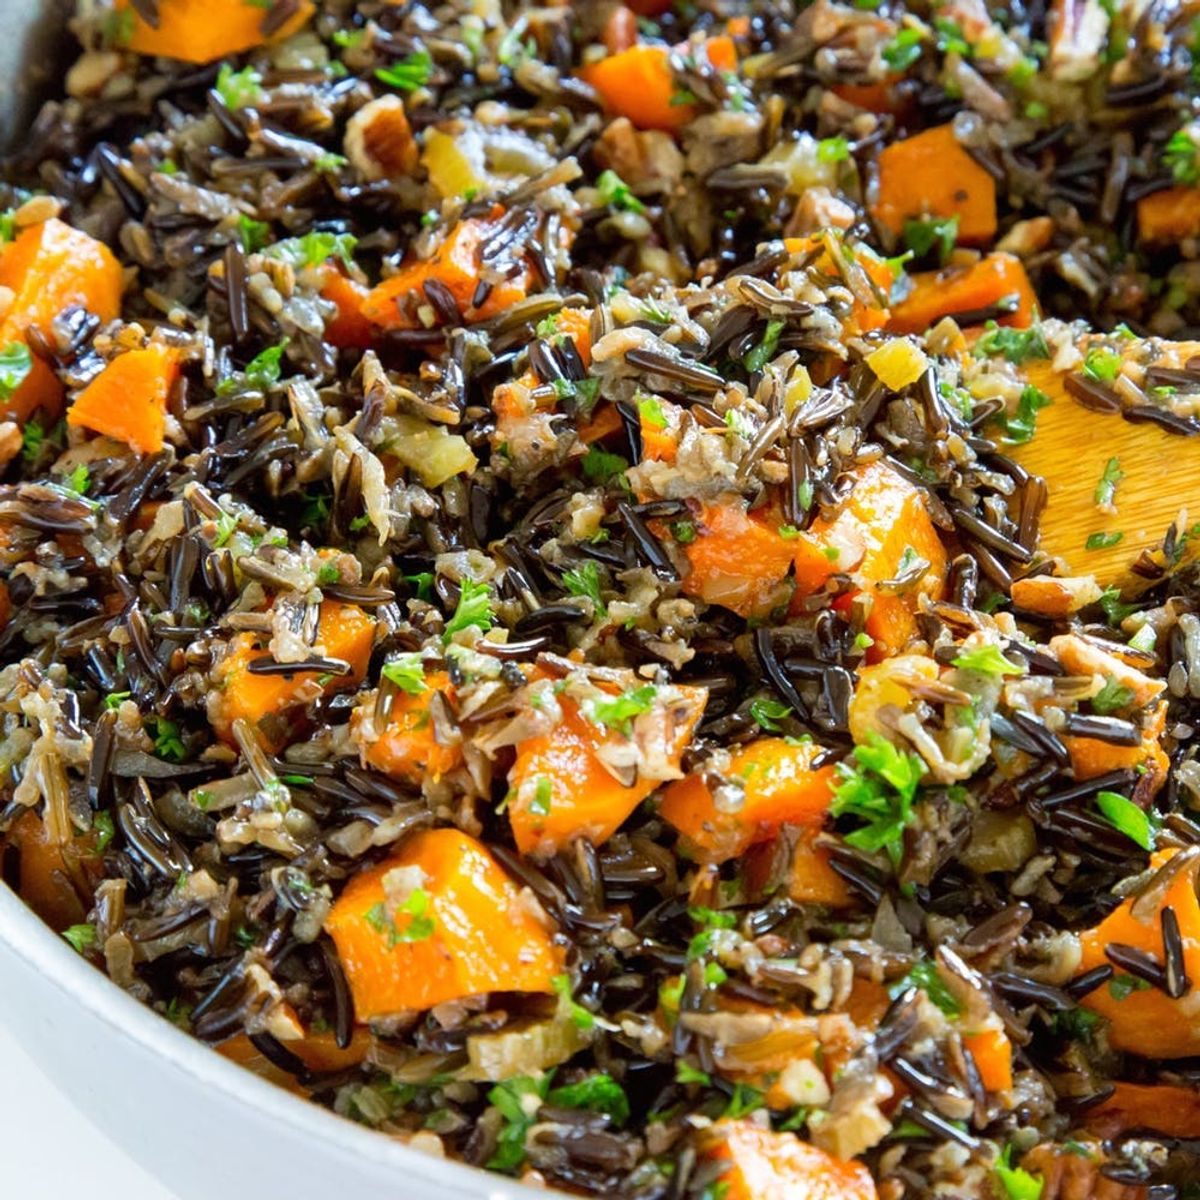 Go Wild for This Gluten-Free Butternut Squash and Wild Rice Stuffing